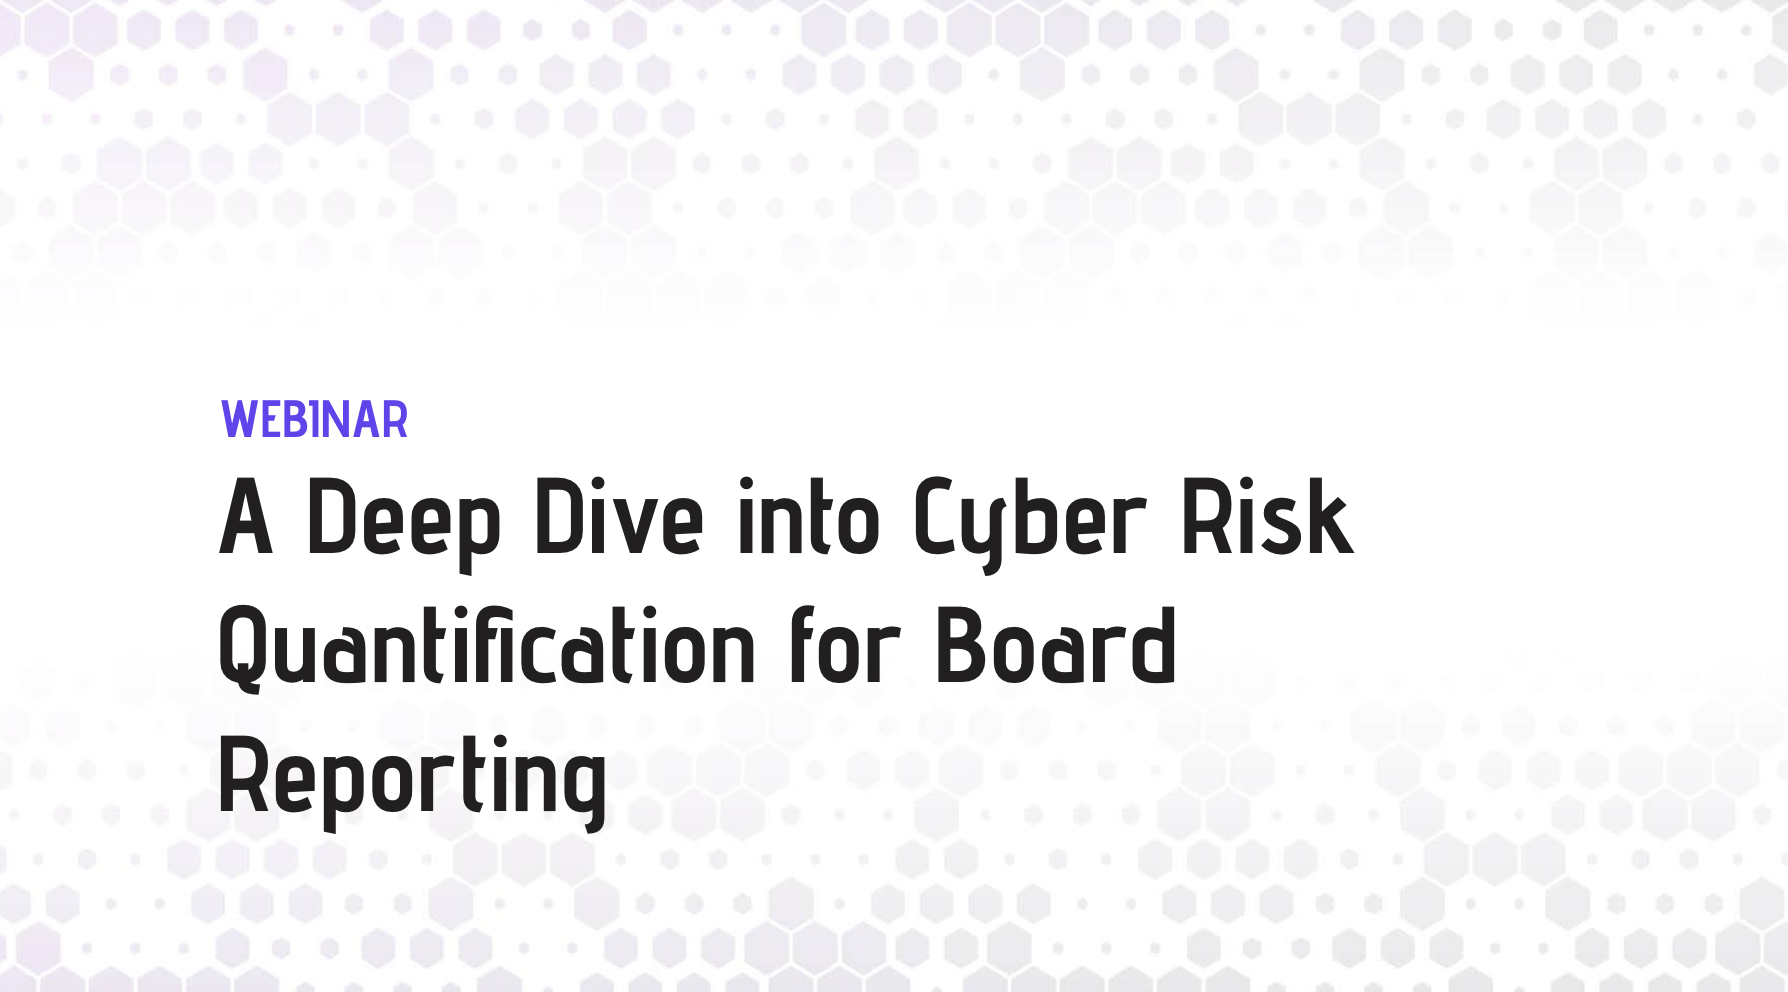 A Deep Dive into Cyber Risk Quantification for Board Reporting